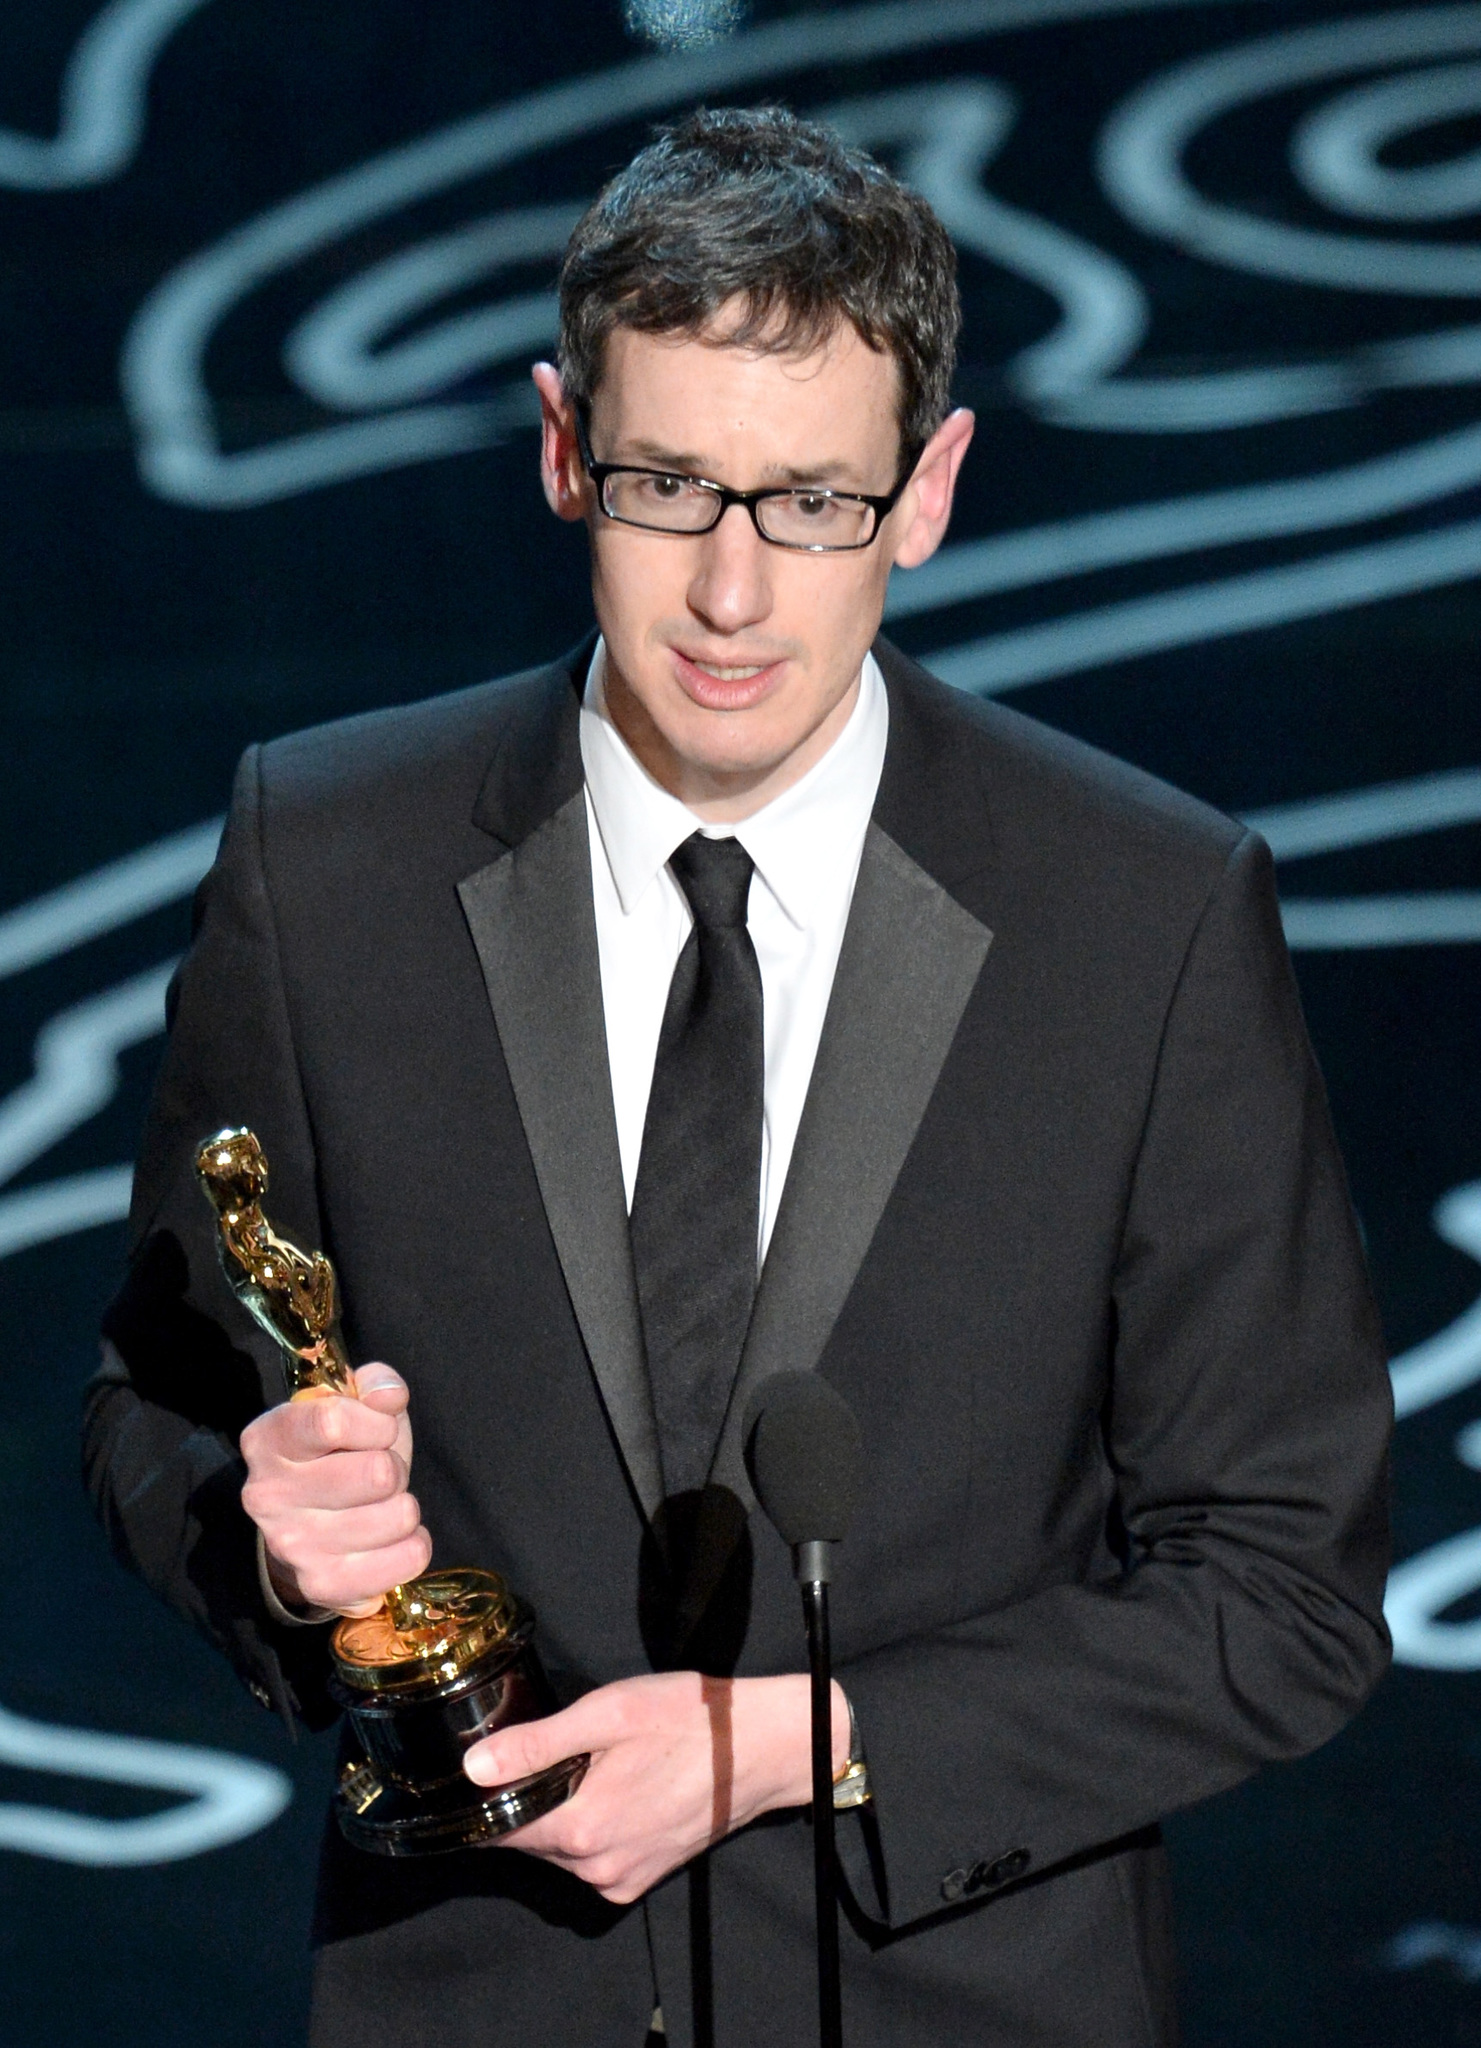 Steven Price at event of The Oscars (2014)